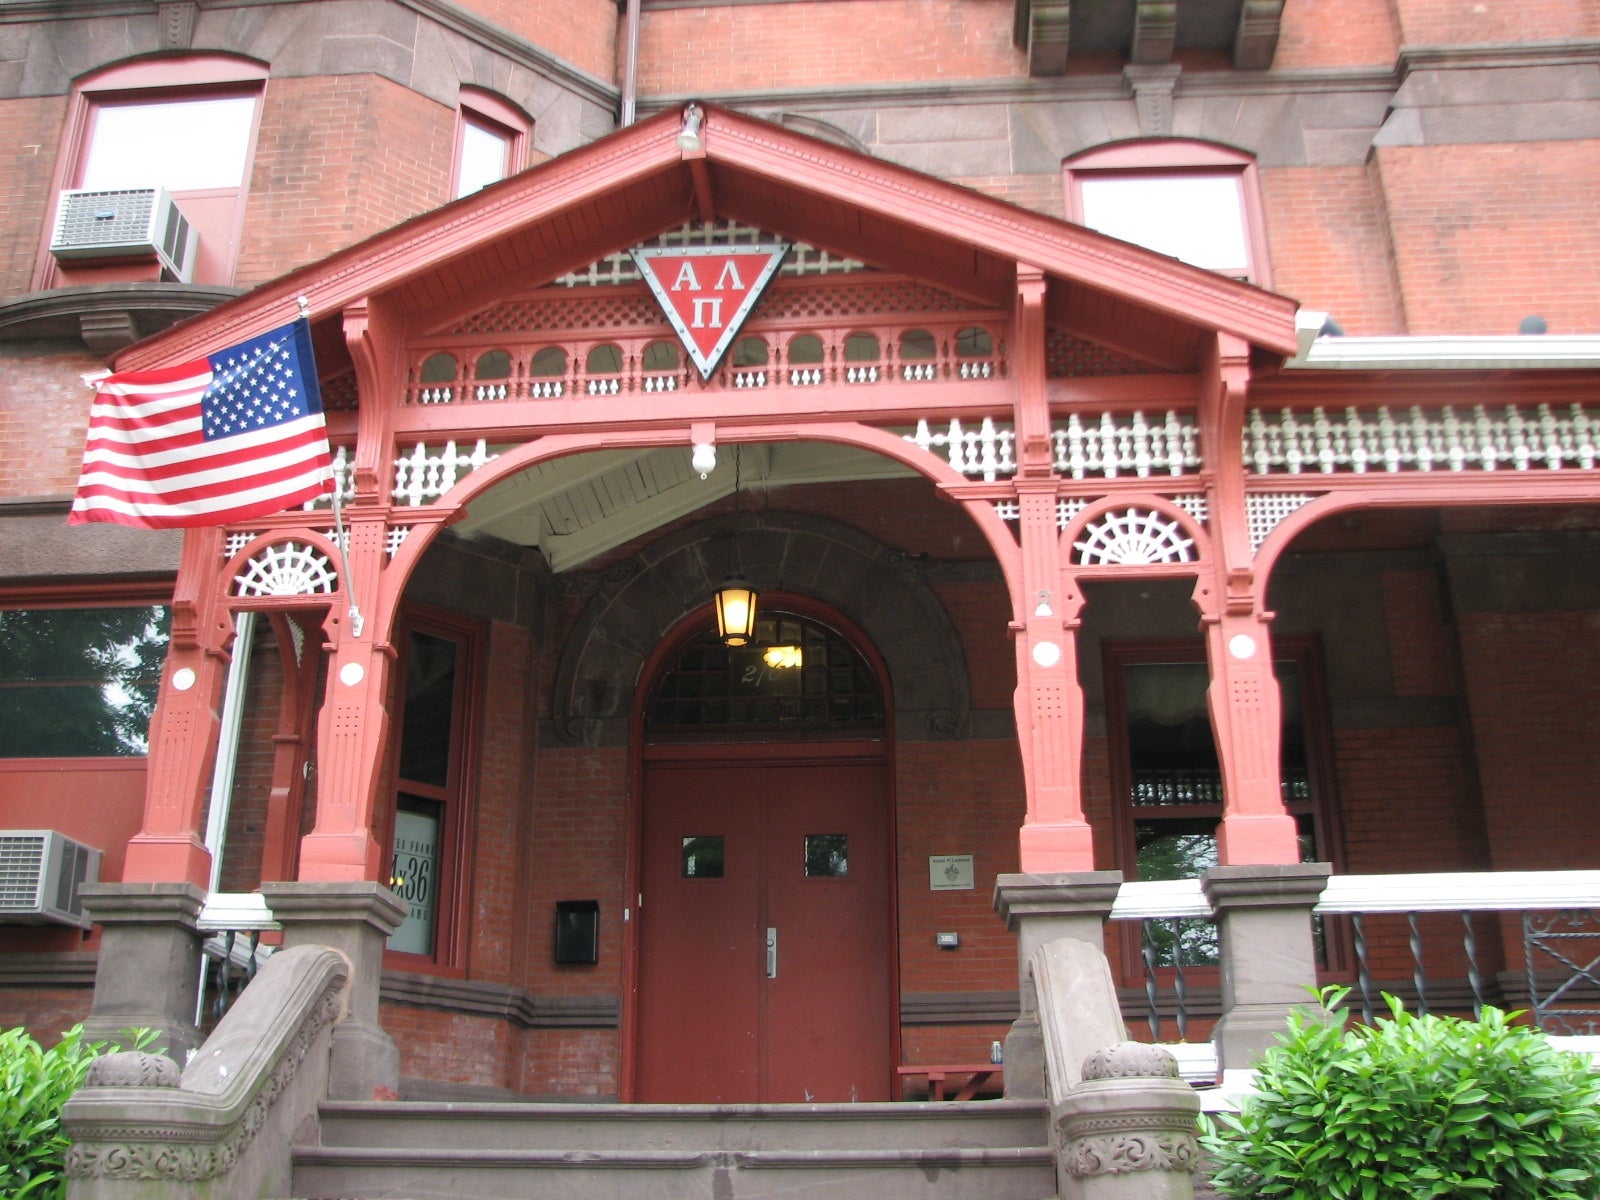 The brewer's home has been a fraternity house since 1939.